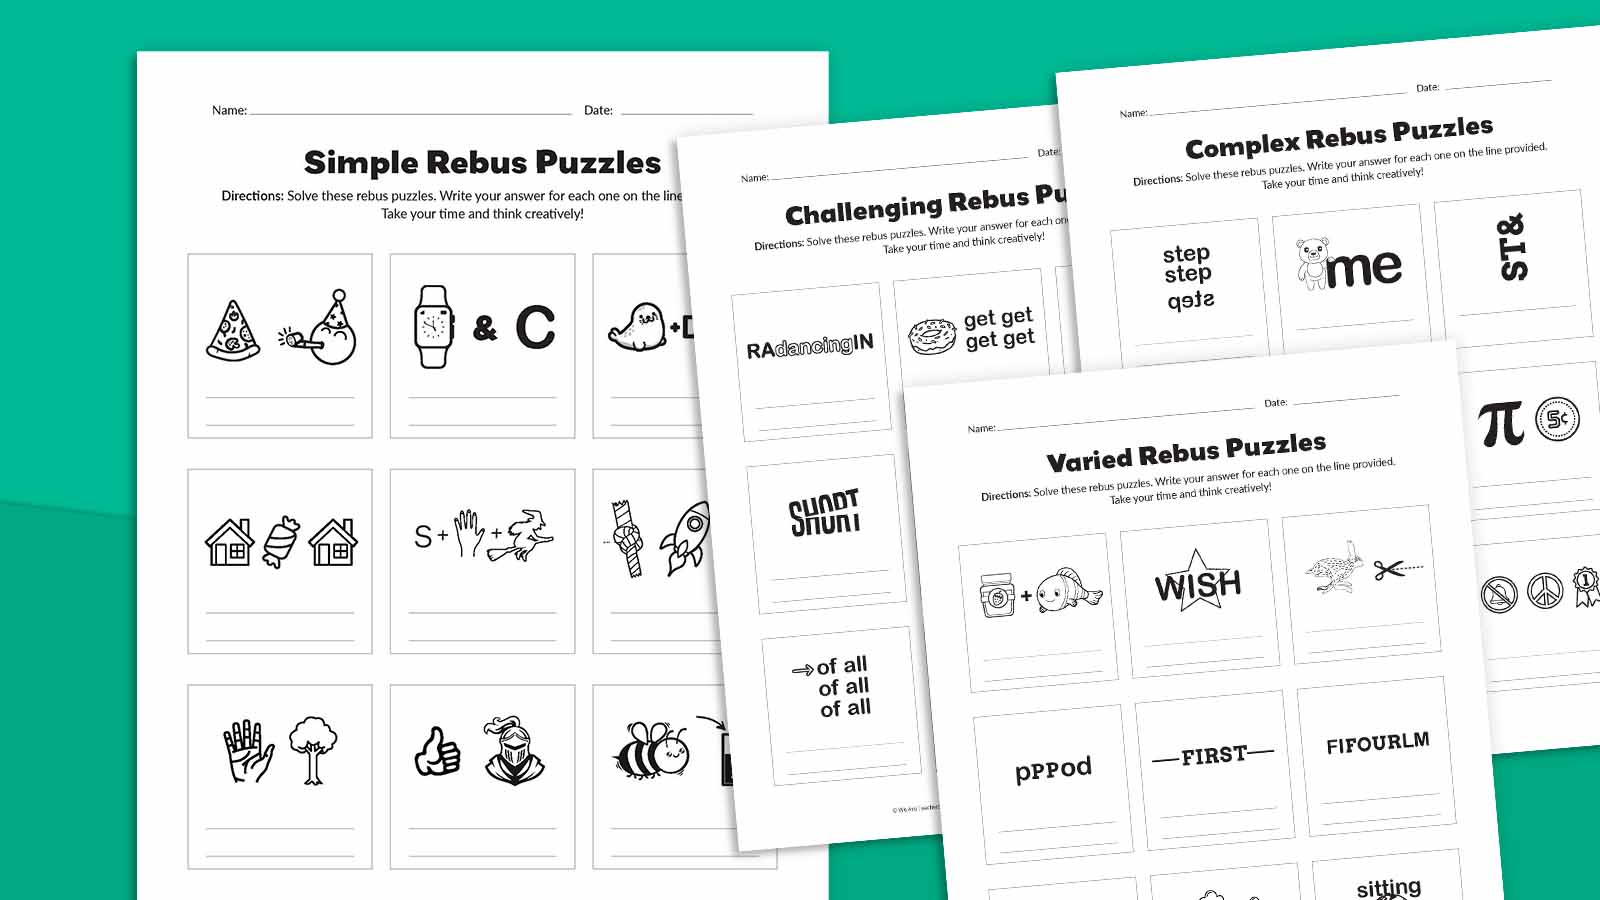 Four printable pages of rebus puzzles on green background.